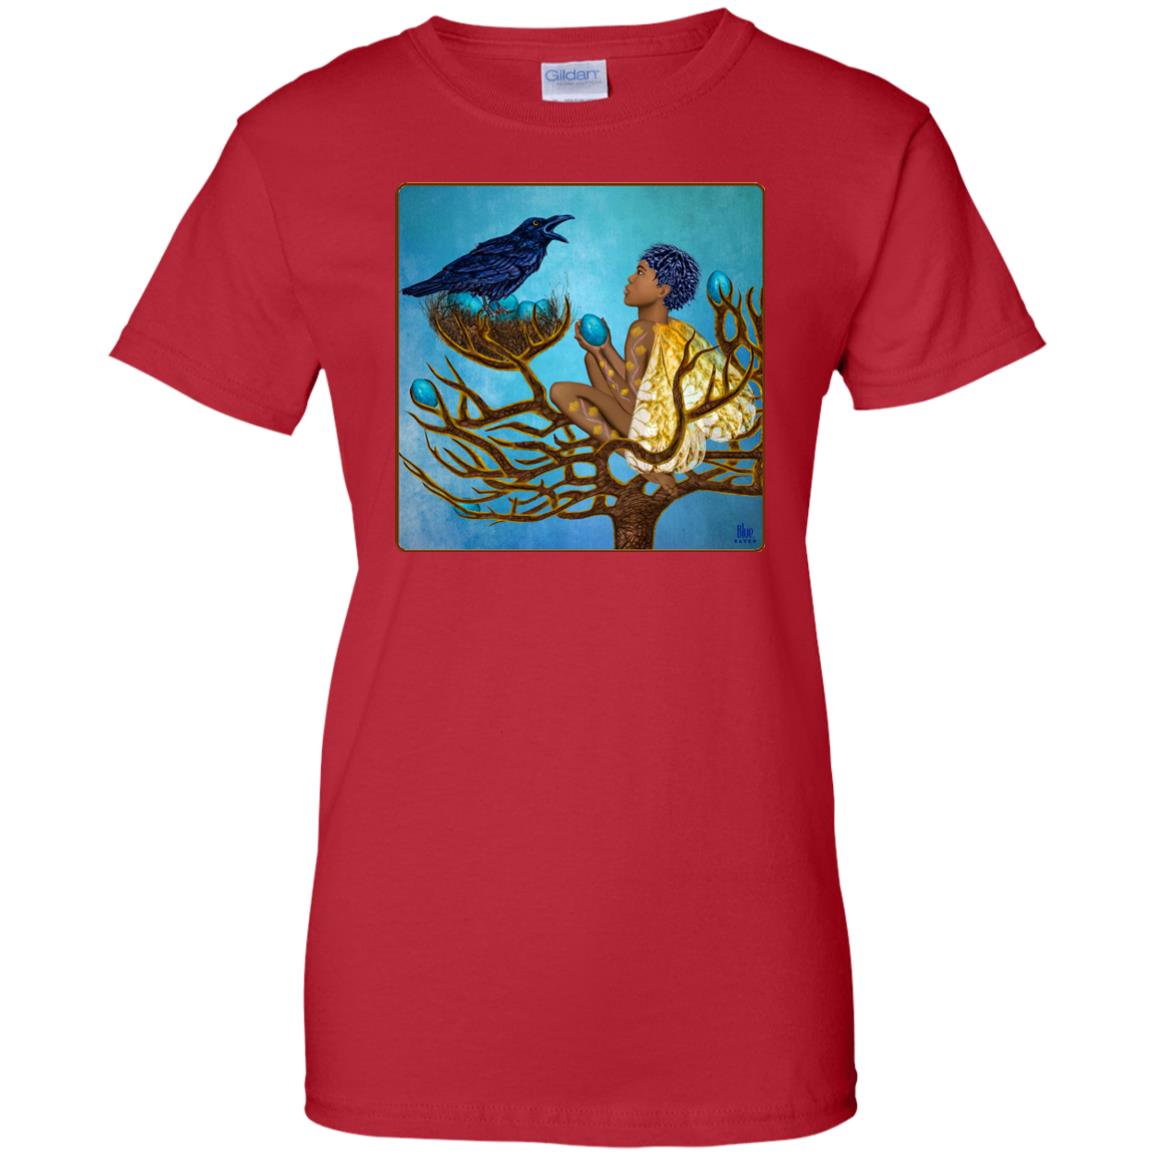 The blue raven's friend - Women's Relaxed Fit T-Shirt